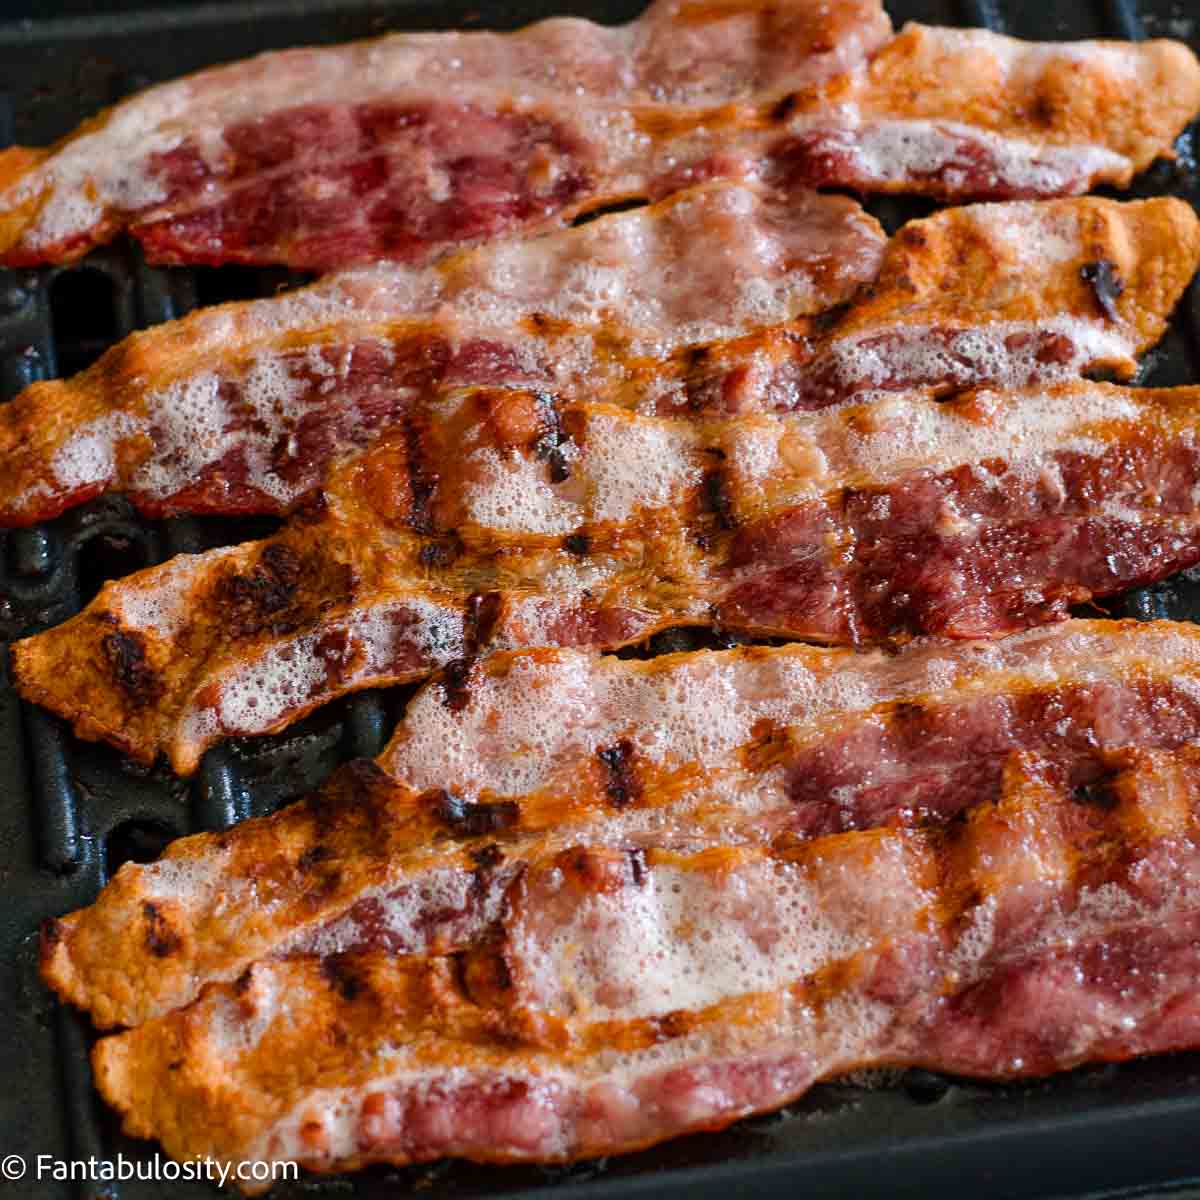 Cooked bacon on the George Foreman Grill.